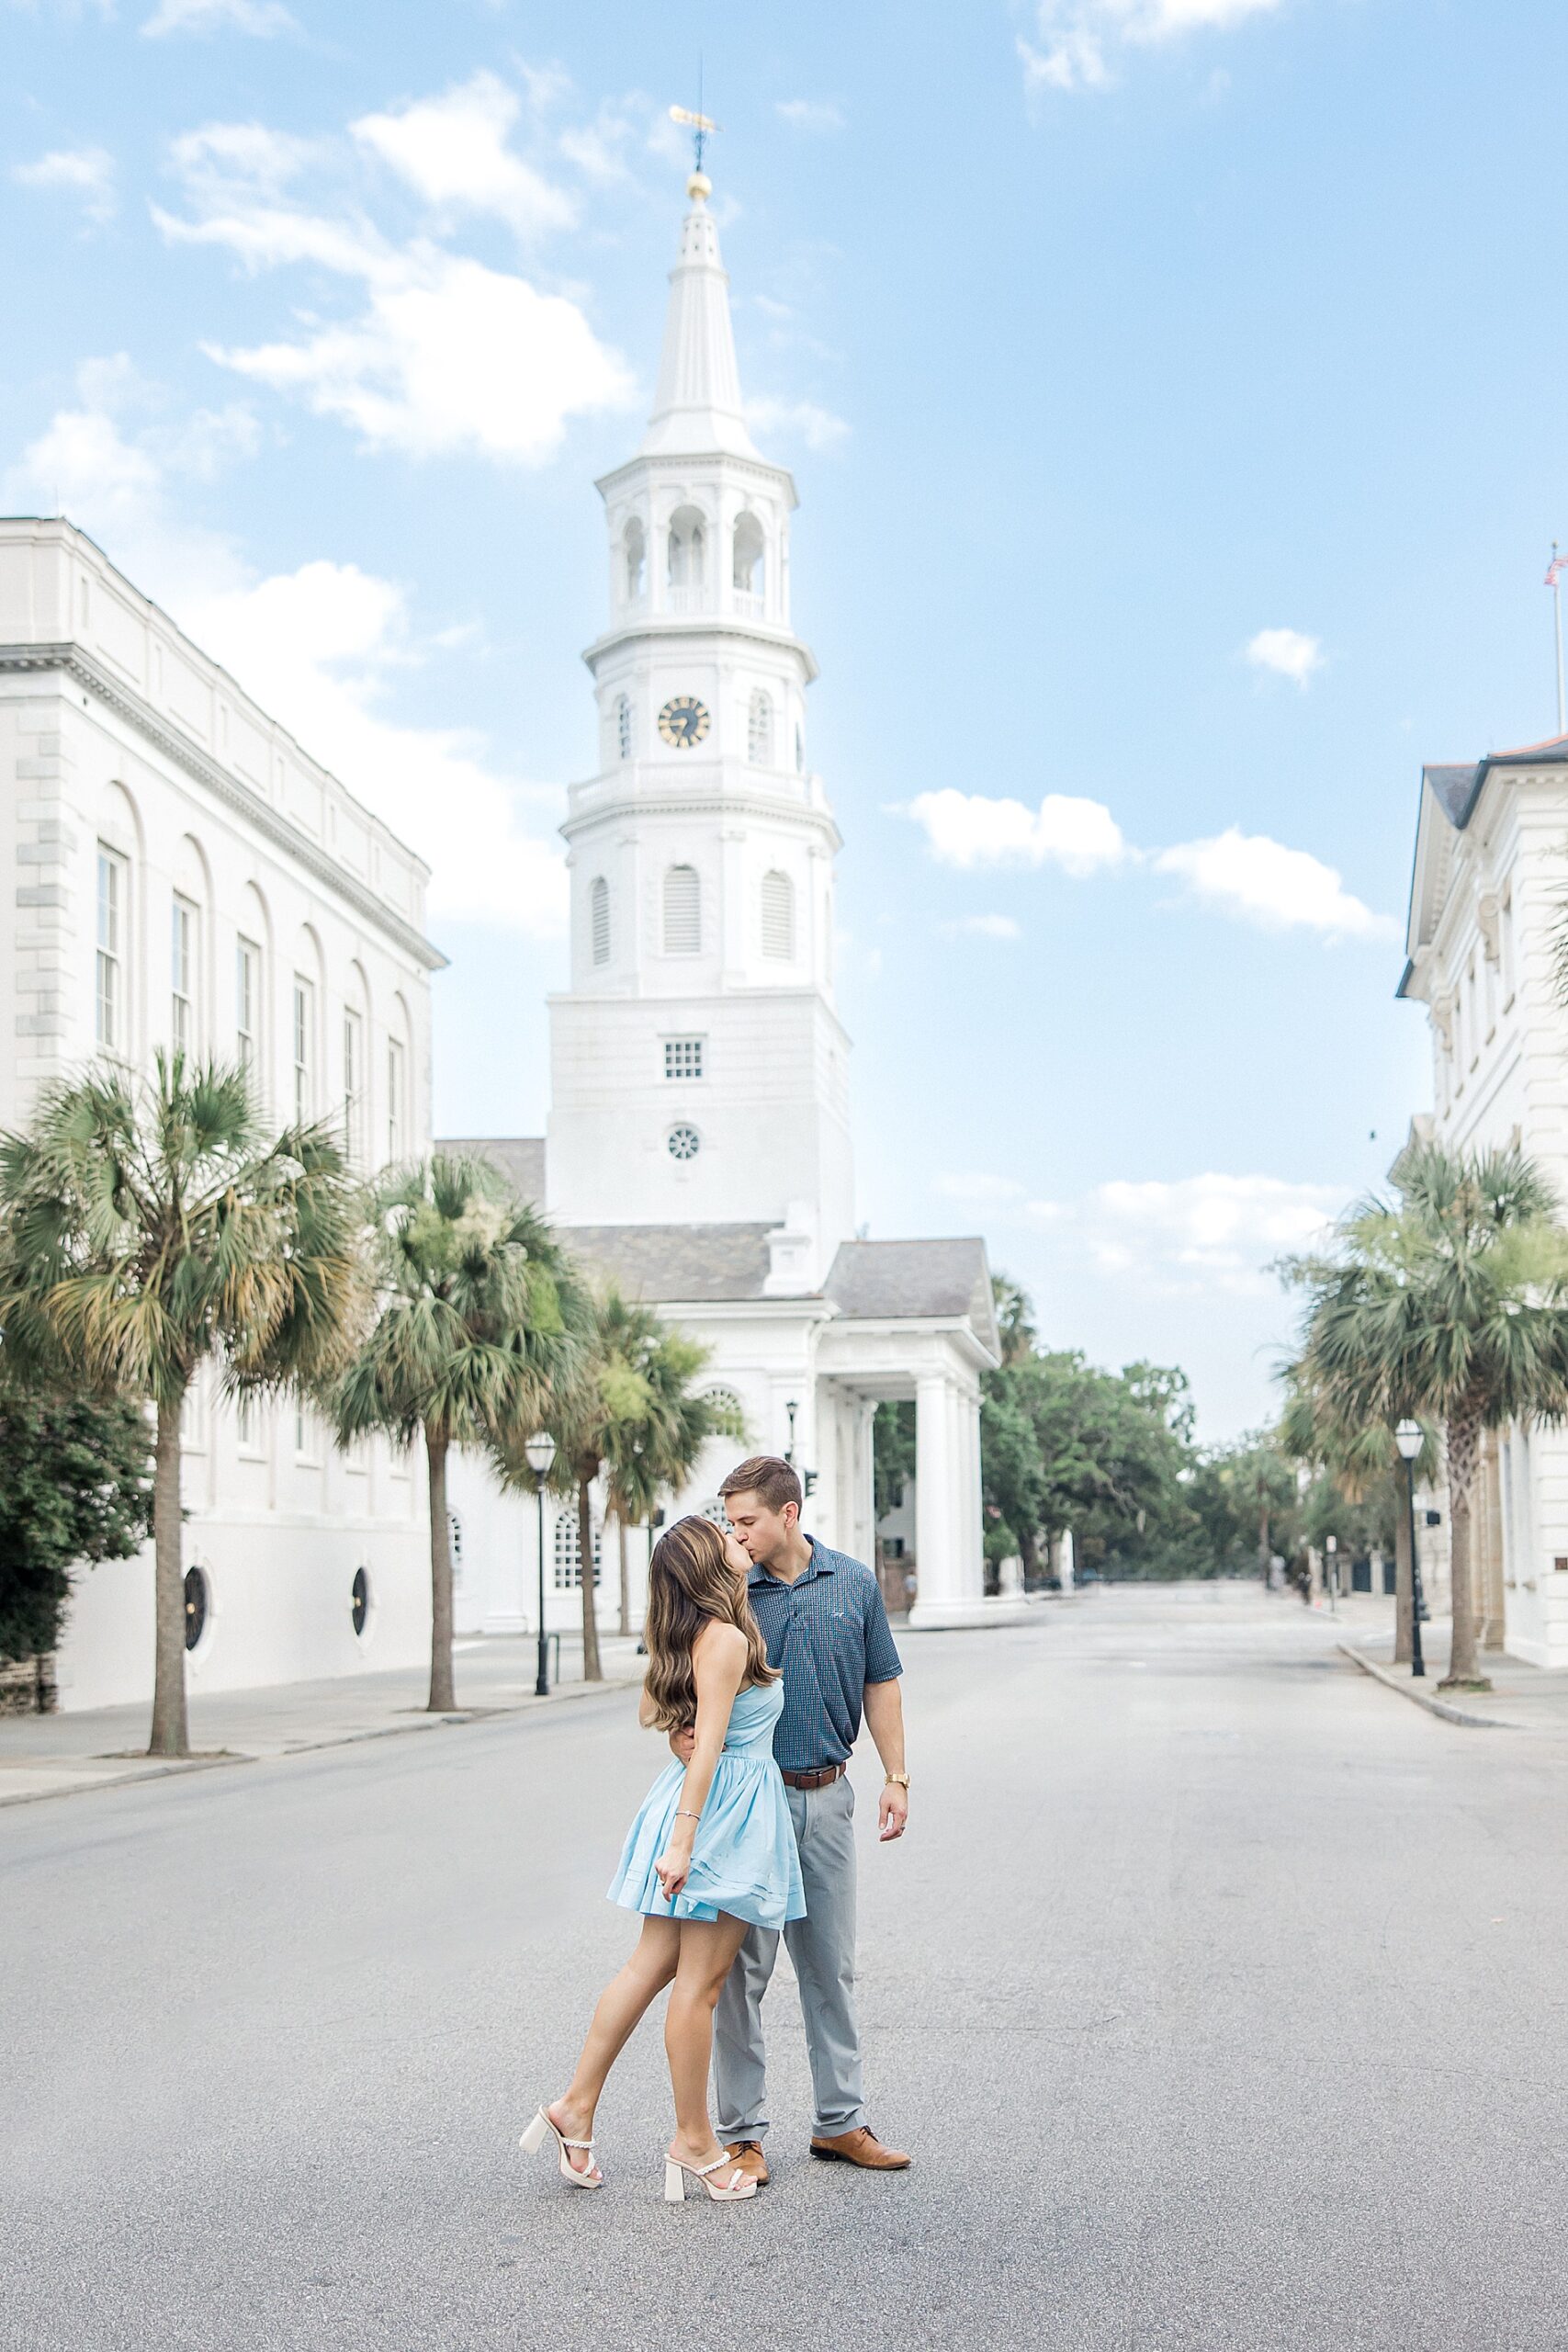 engaged couple by old church steeple in downtown Charleston